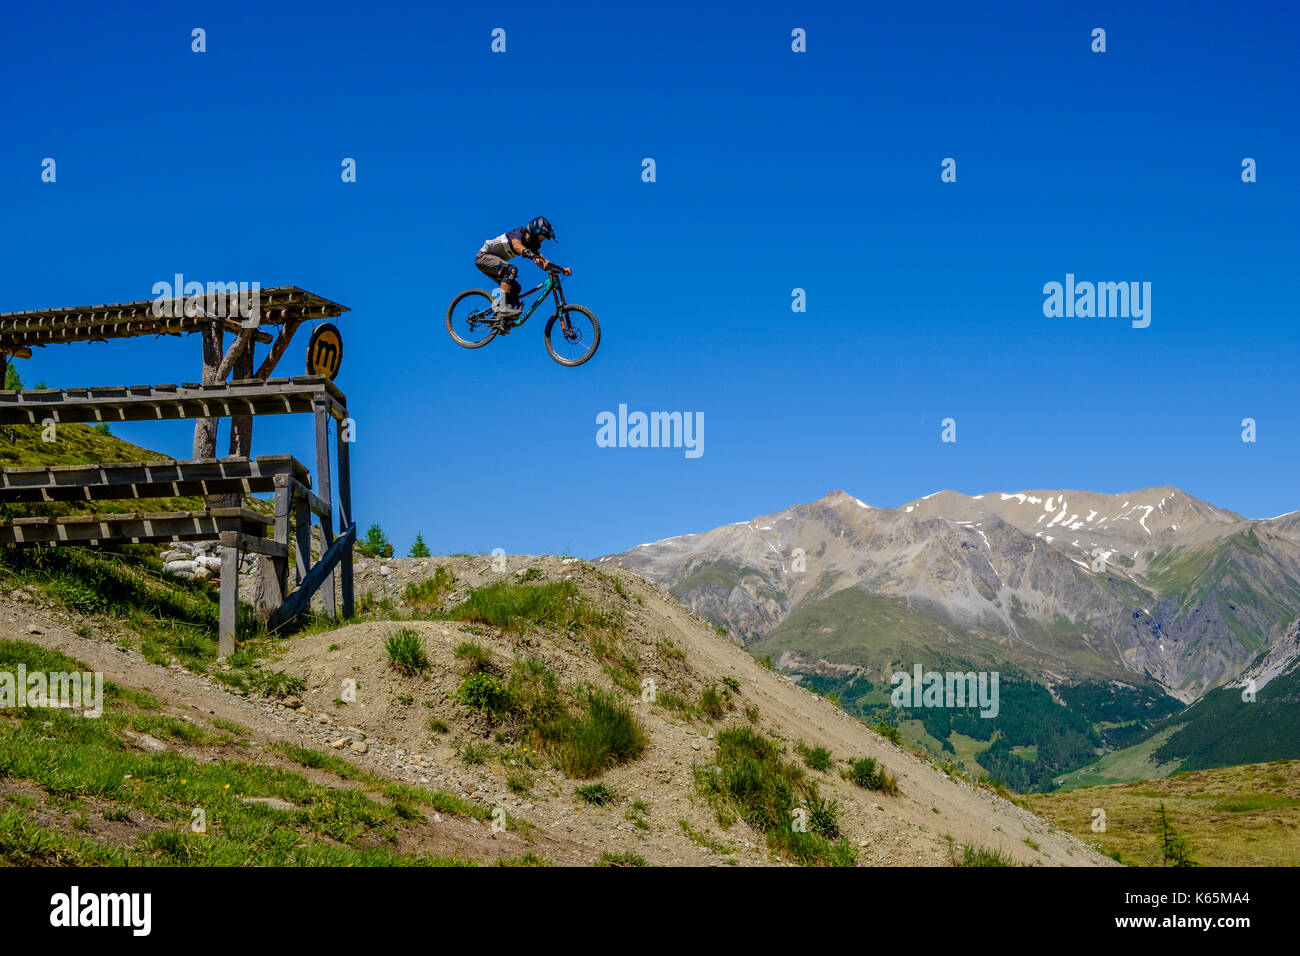 Downhill cyclist in action jumping down from a platform in the Motolino Bike Park Stock Photo